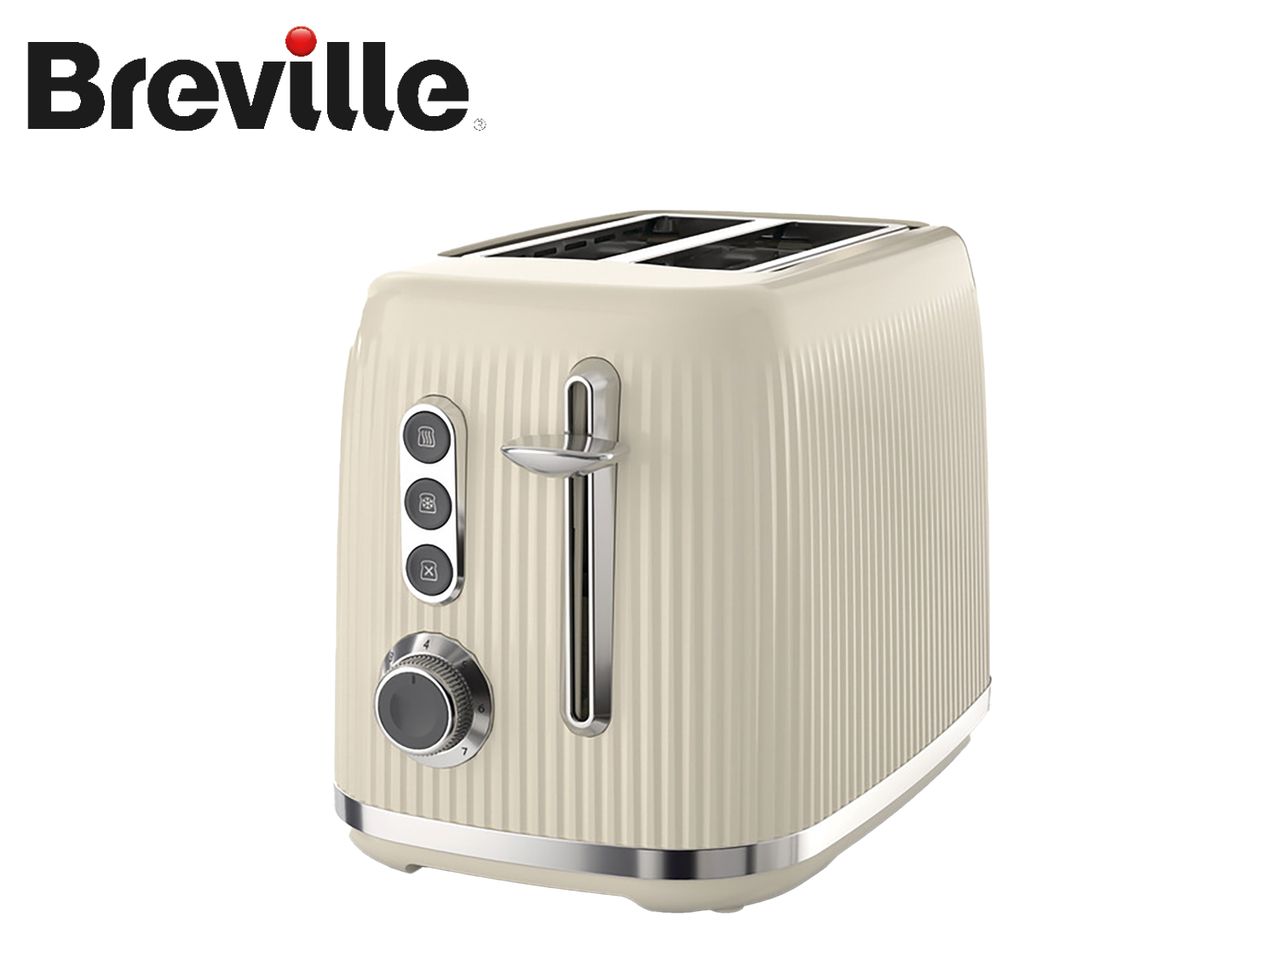 Go to full screen view: Breville Bold 2 Slice Toaster - Cream - Image 1